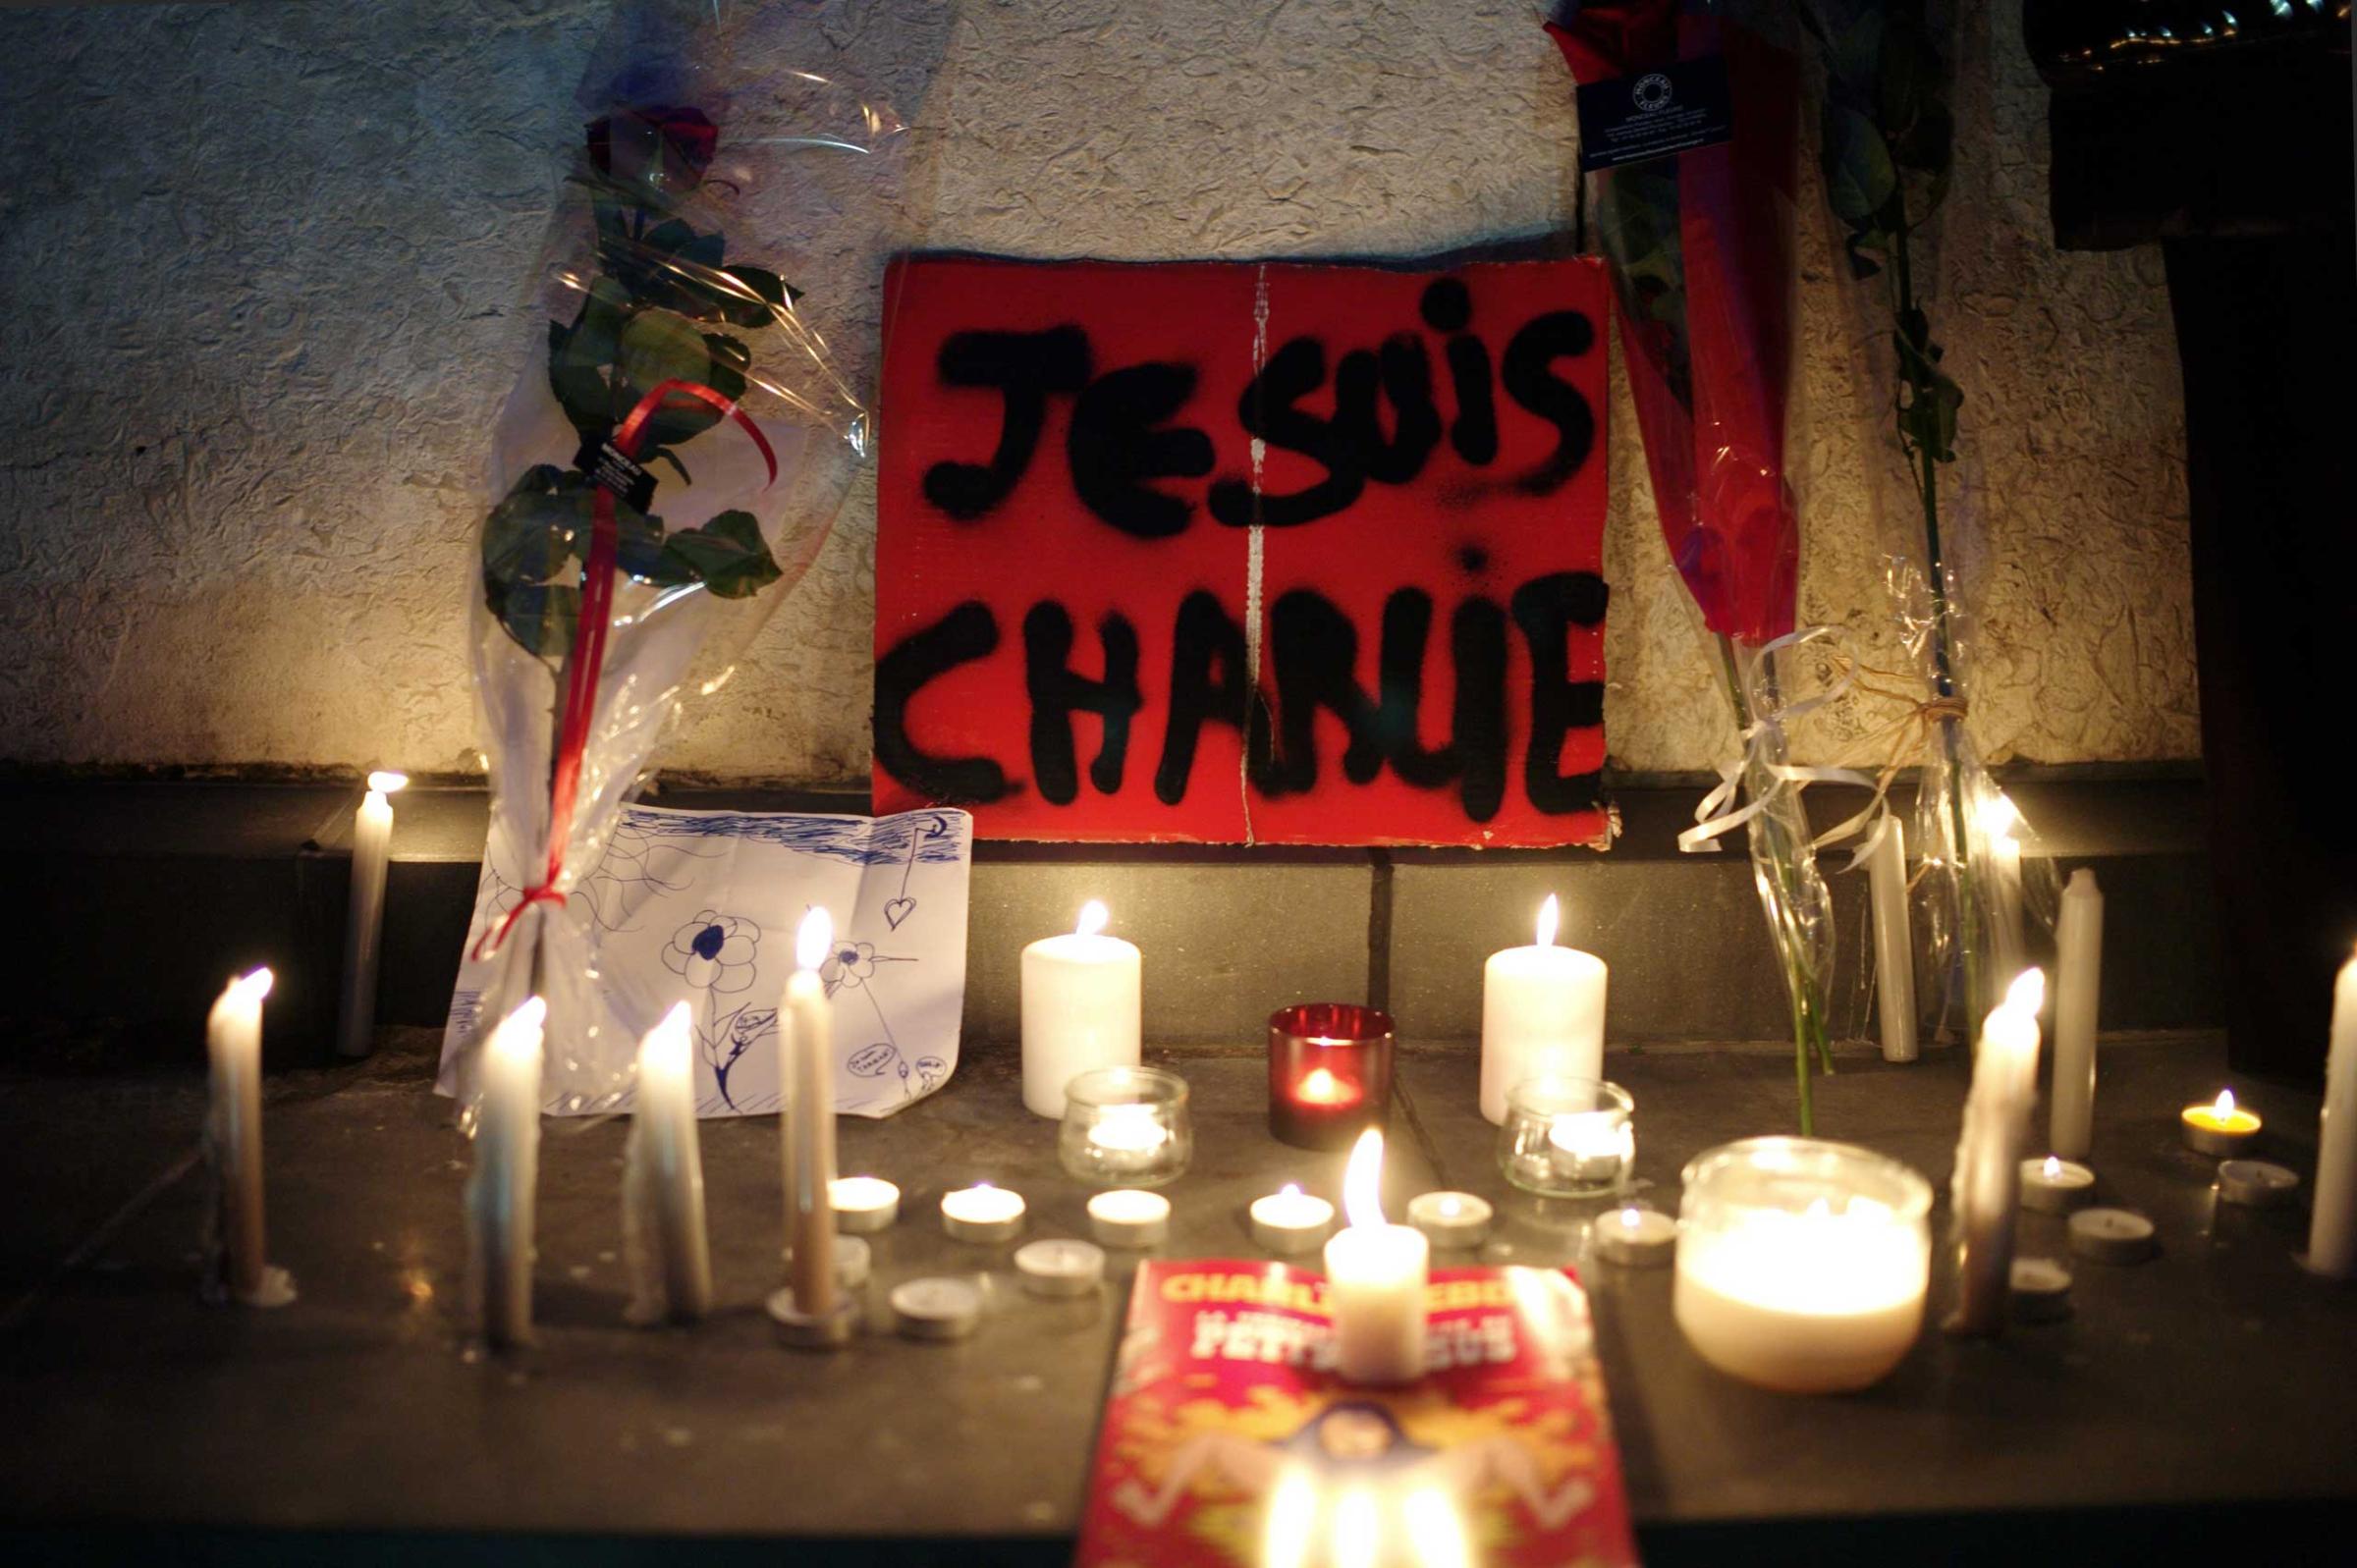 A banner reading "I am Charlie" is displayed with candles during a gathering to pay respect for the victims of a terror attack against a satirical newspaper, in Paris, Jan. 7, 2015.